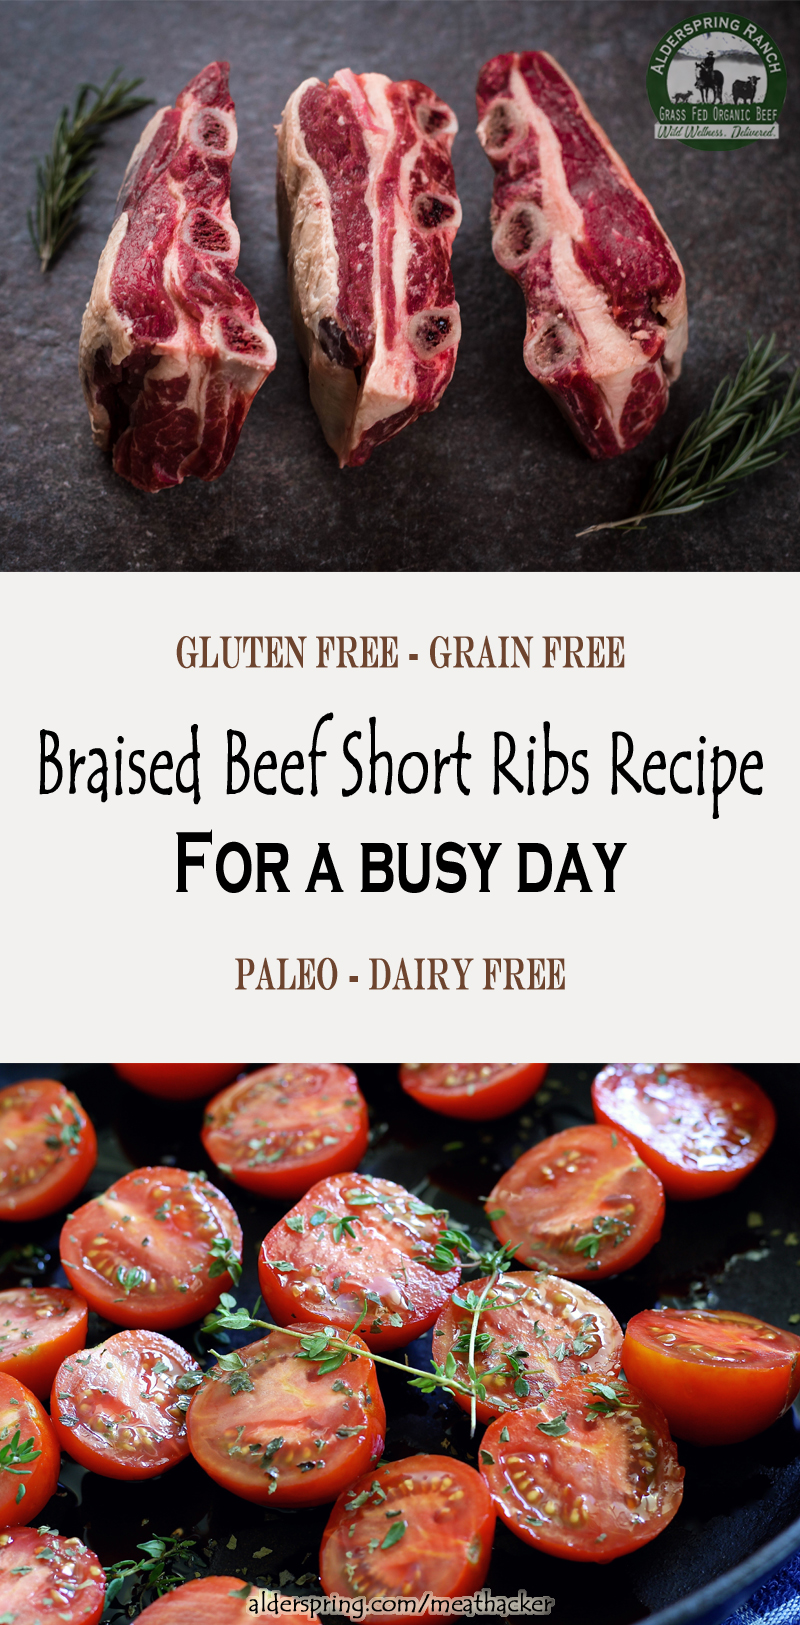 Braised Beef Short Ribs Recipe For a Busy Day